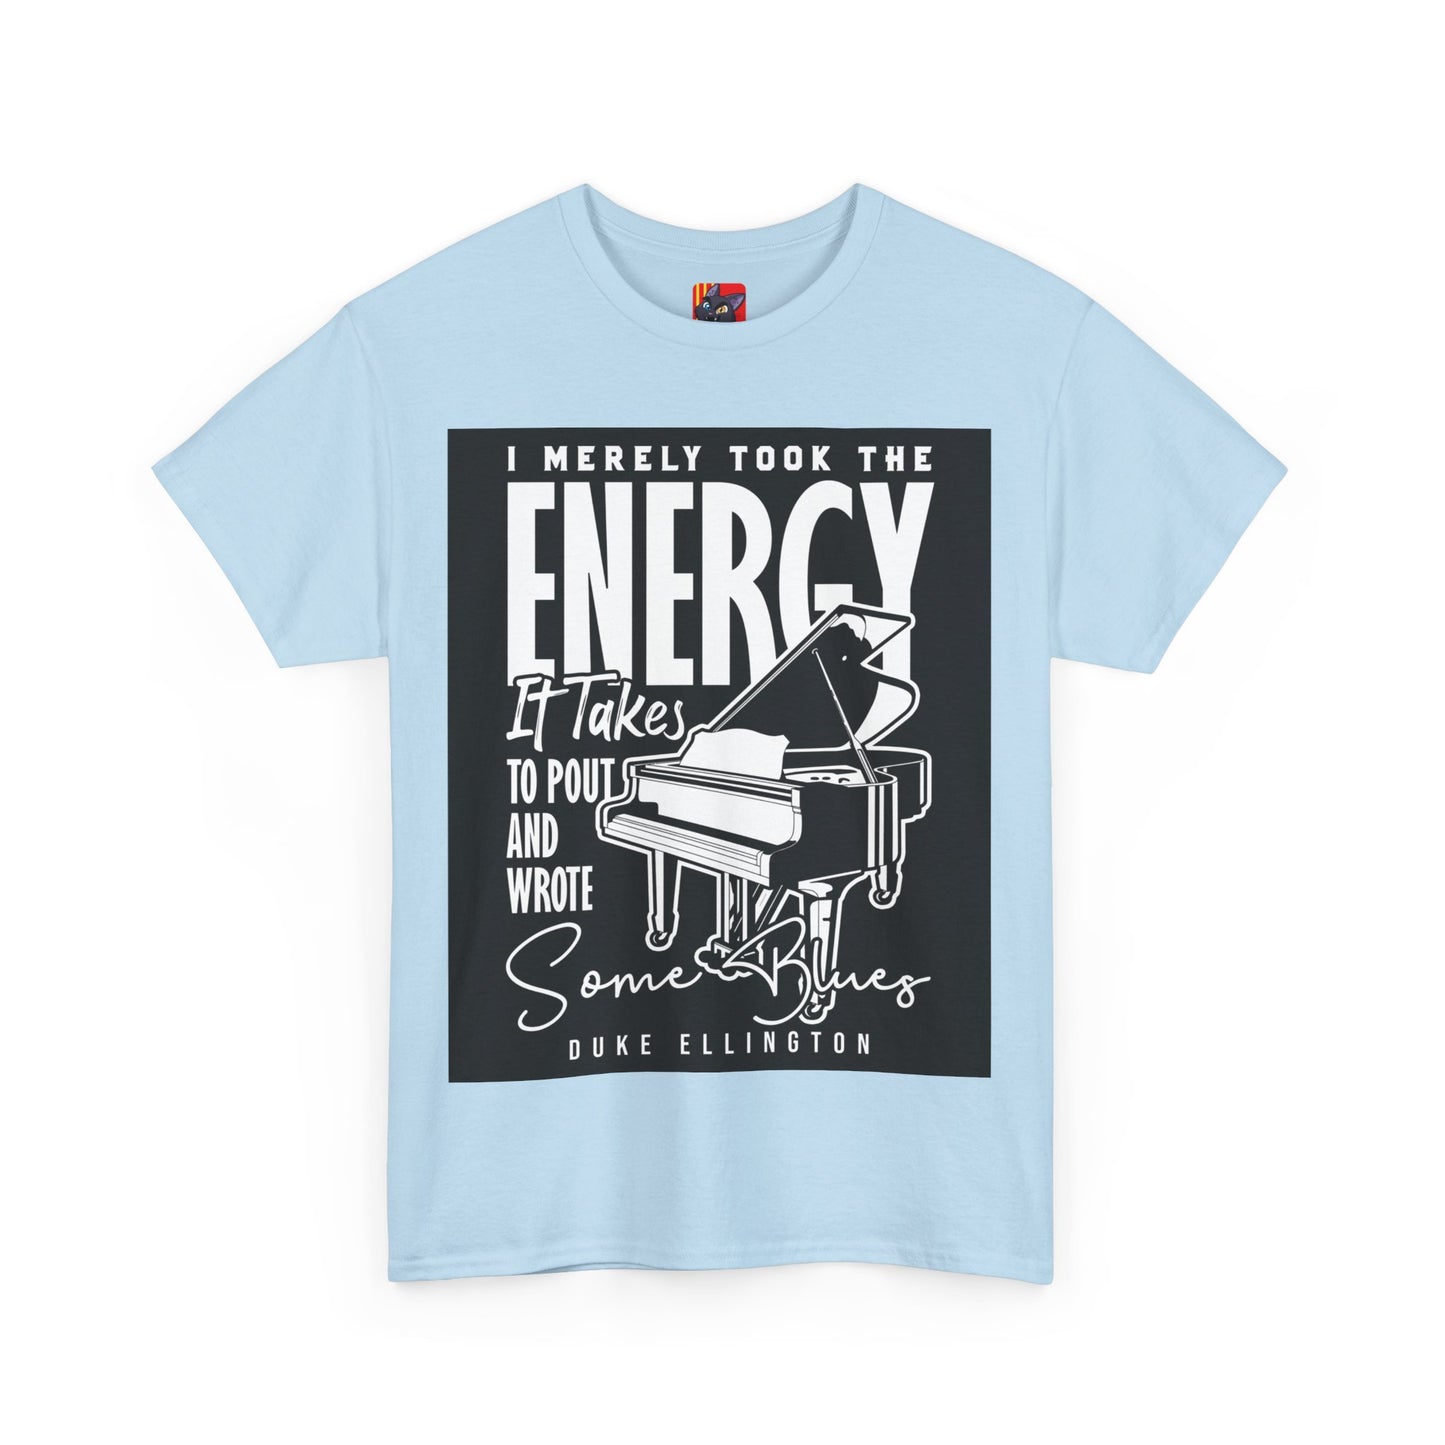 The Order of Music T-Shirt: I merely took the energy